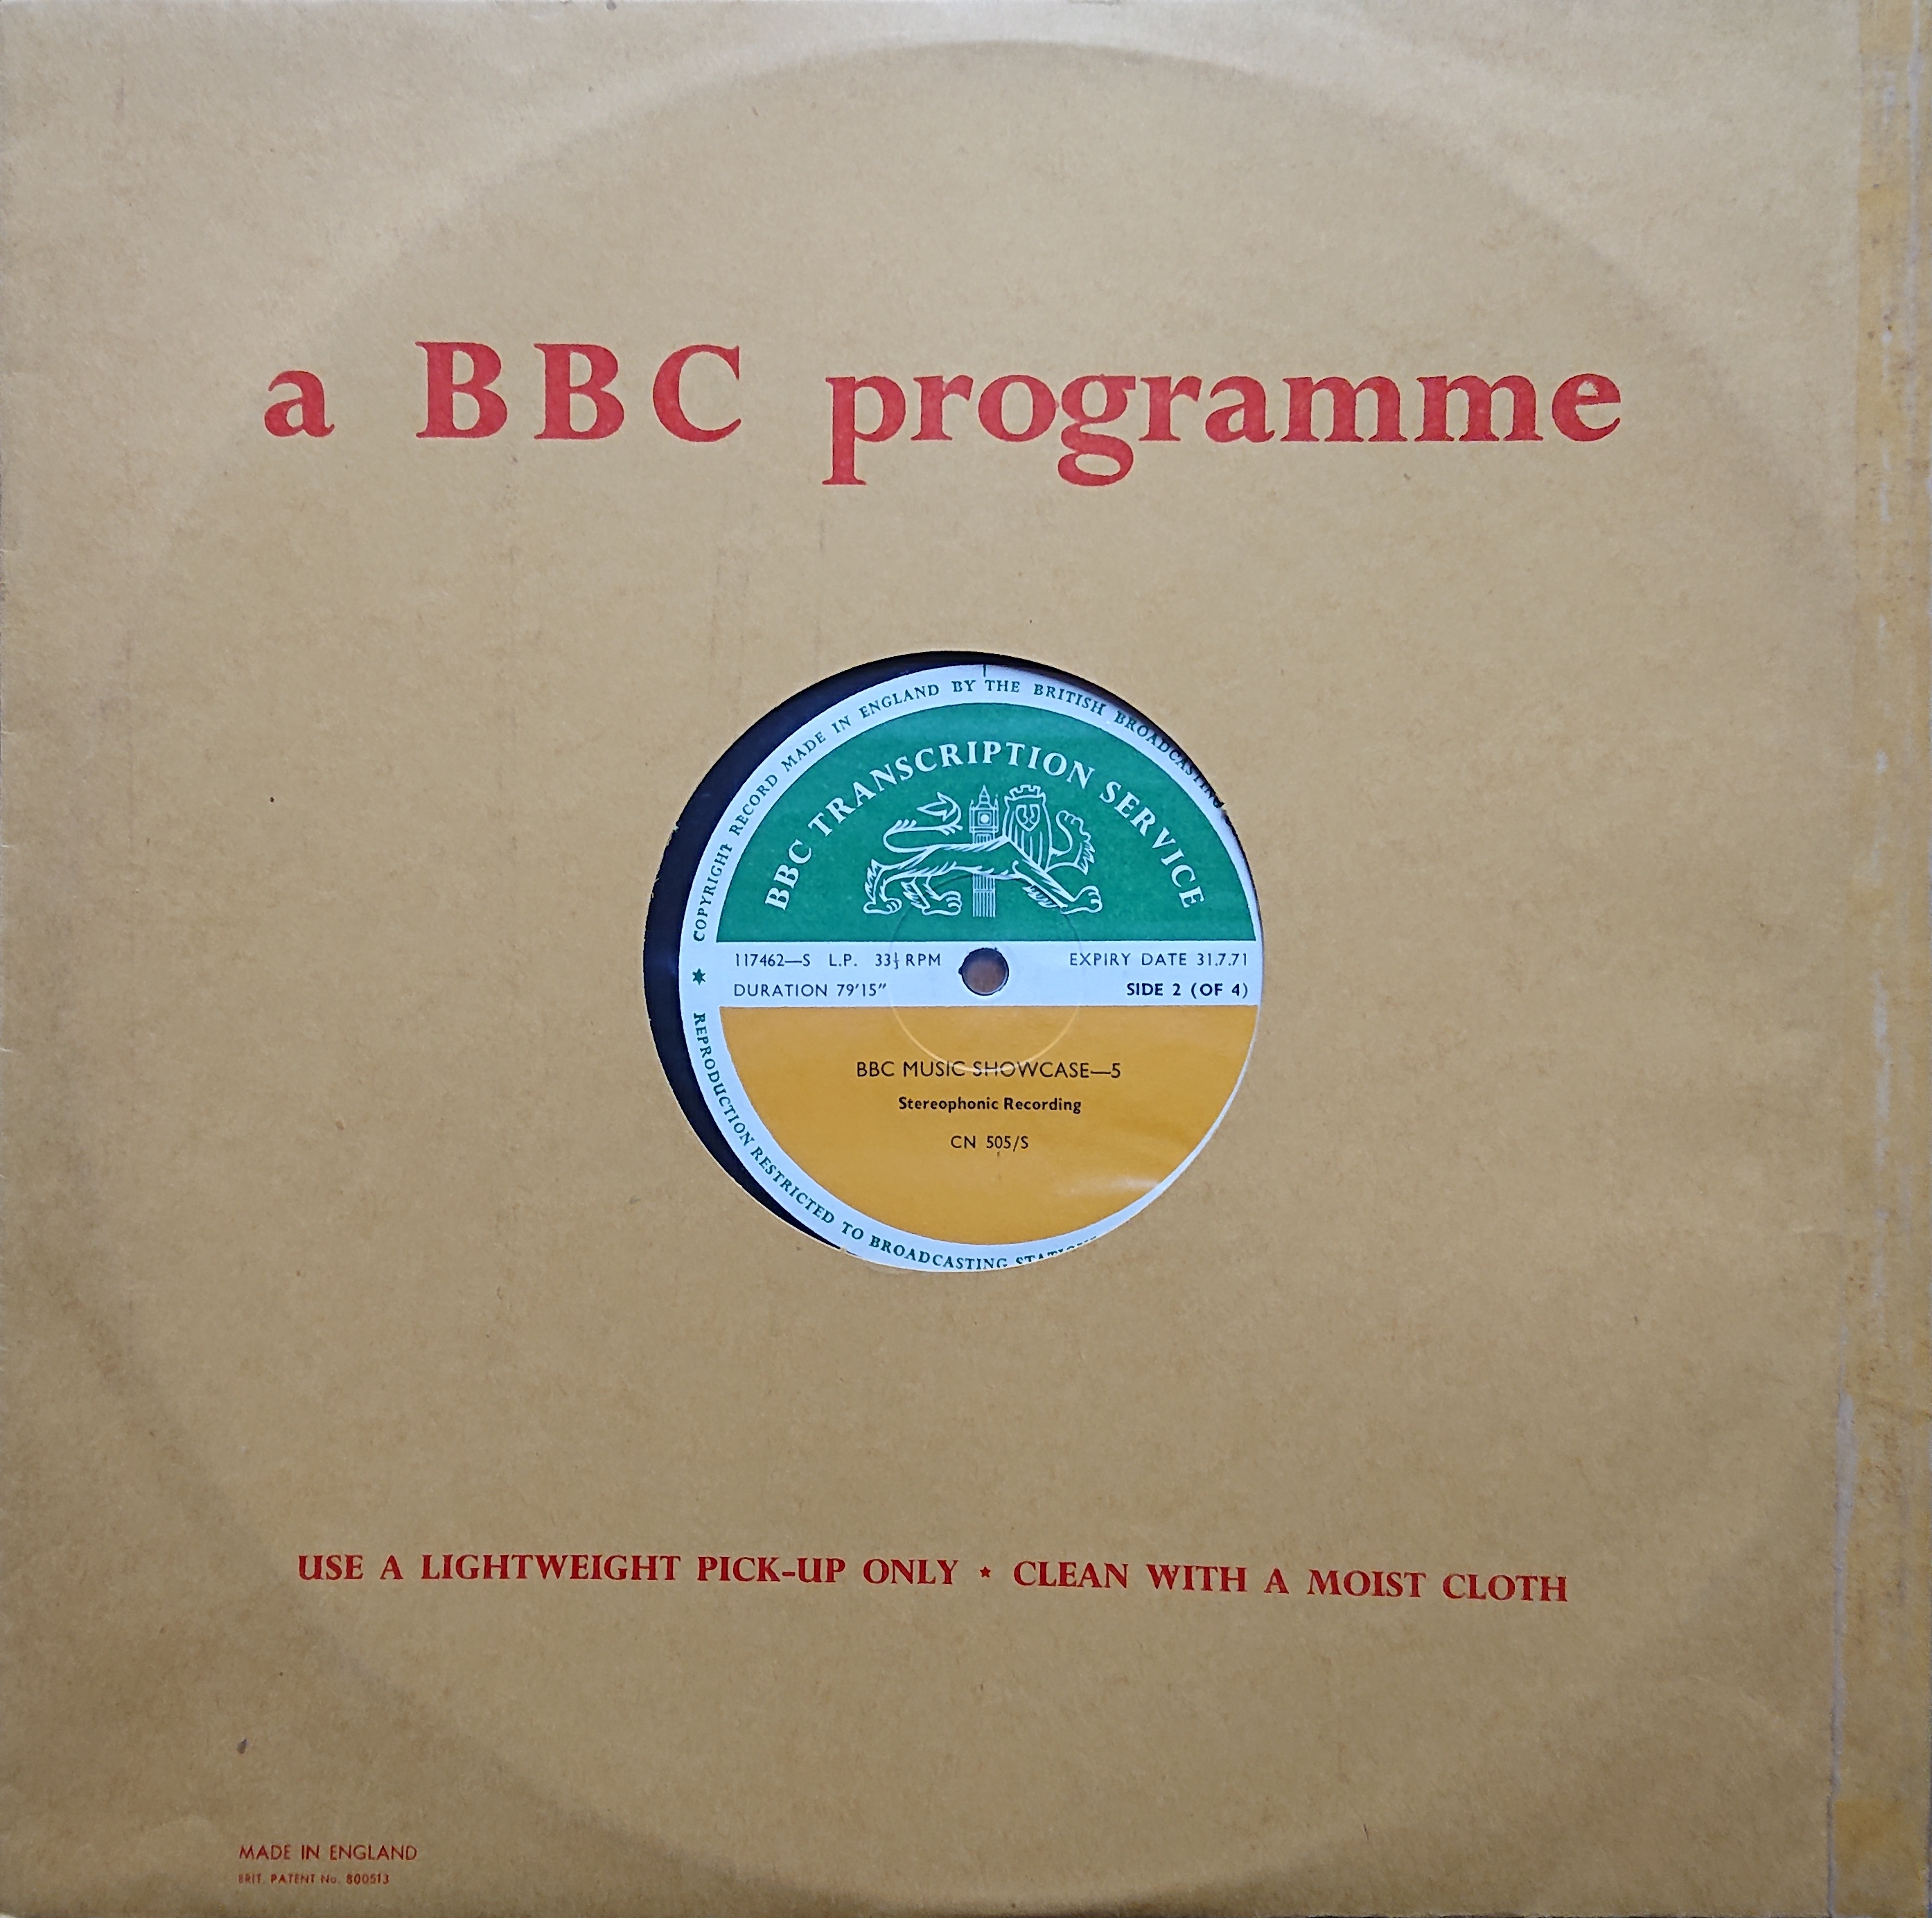 Picture of CN 505 S 10 BBC music showcase - 5 (Sides 2 & 4) by artist Various from the BBC albums - Records and Tapes library